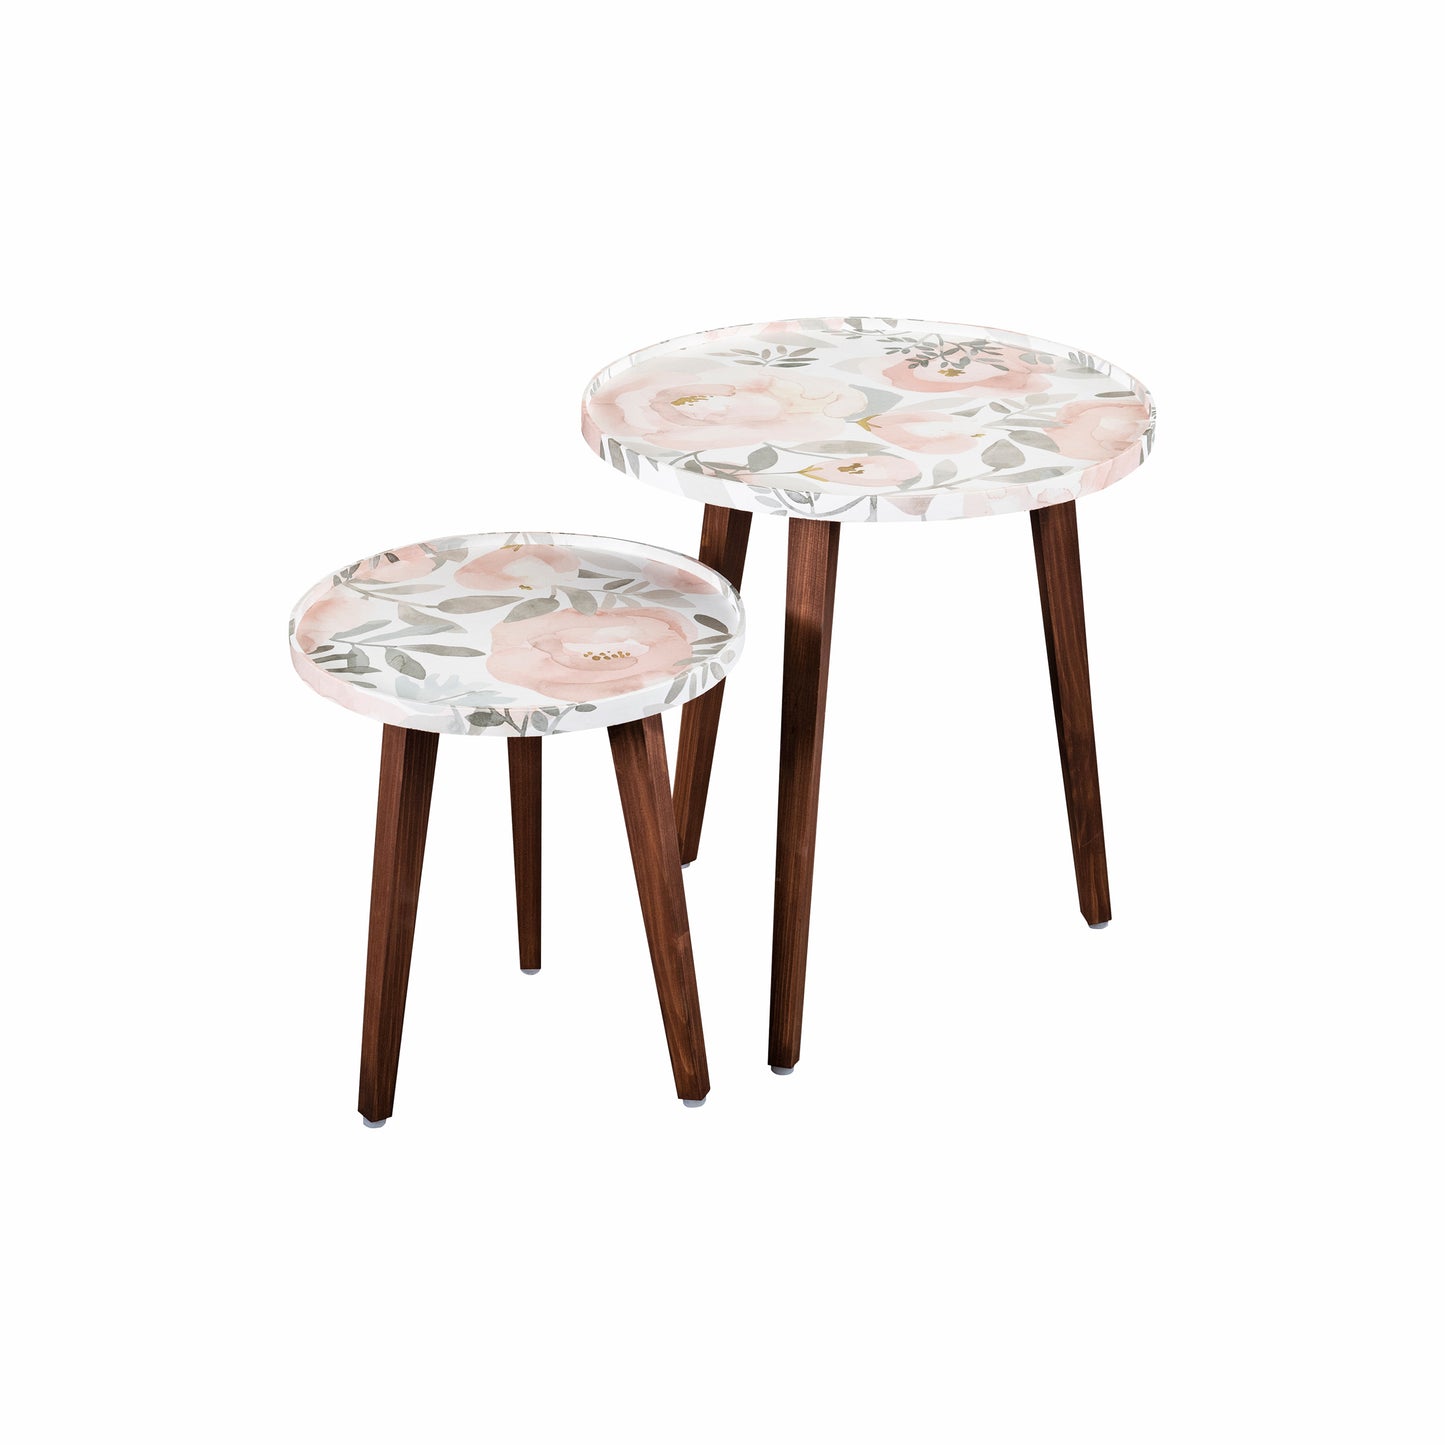 A Tiny Mistake Blossom (Peach and Pink) Wooden Nesting Tables (Set of 2), Living Room Decor